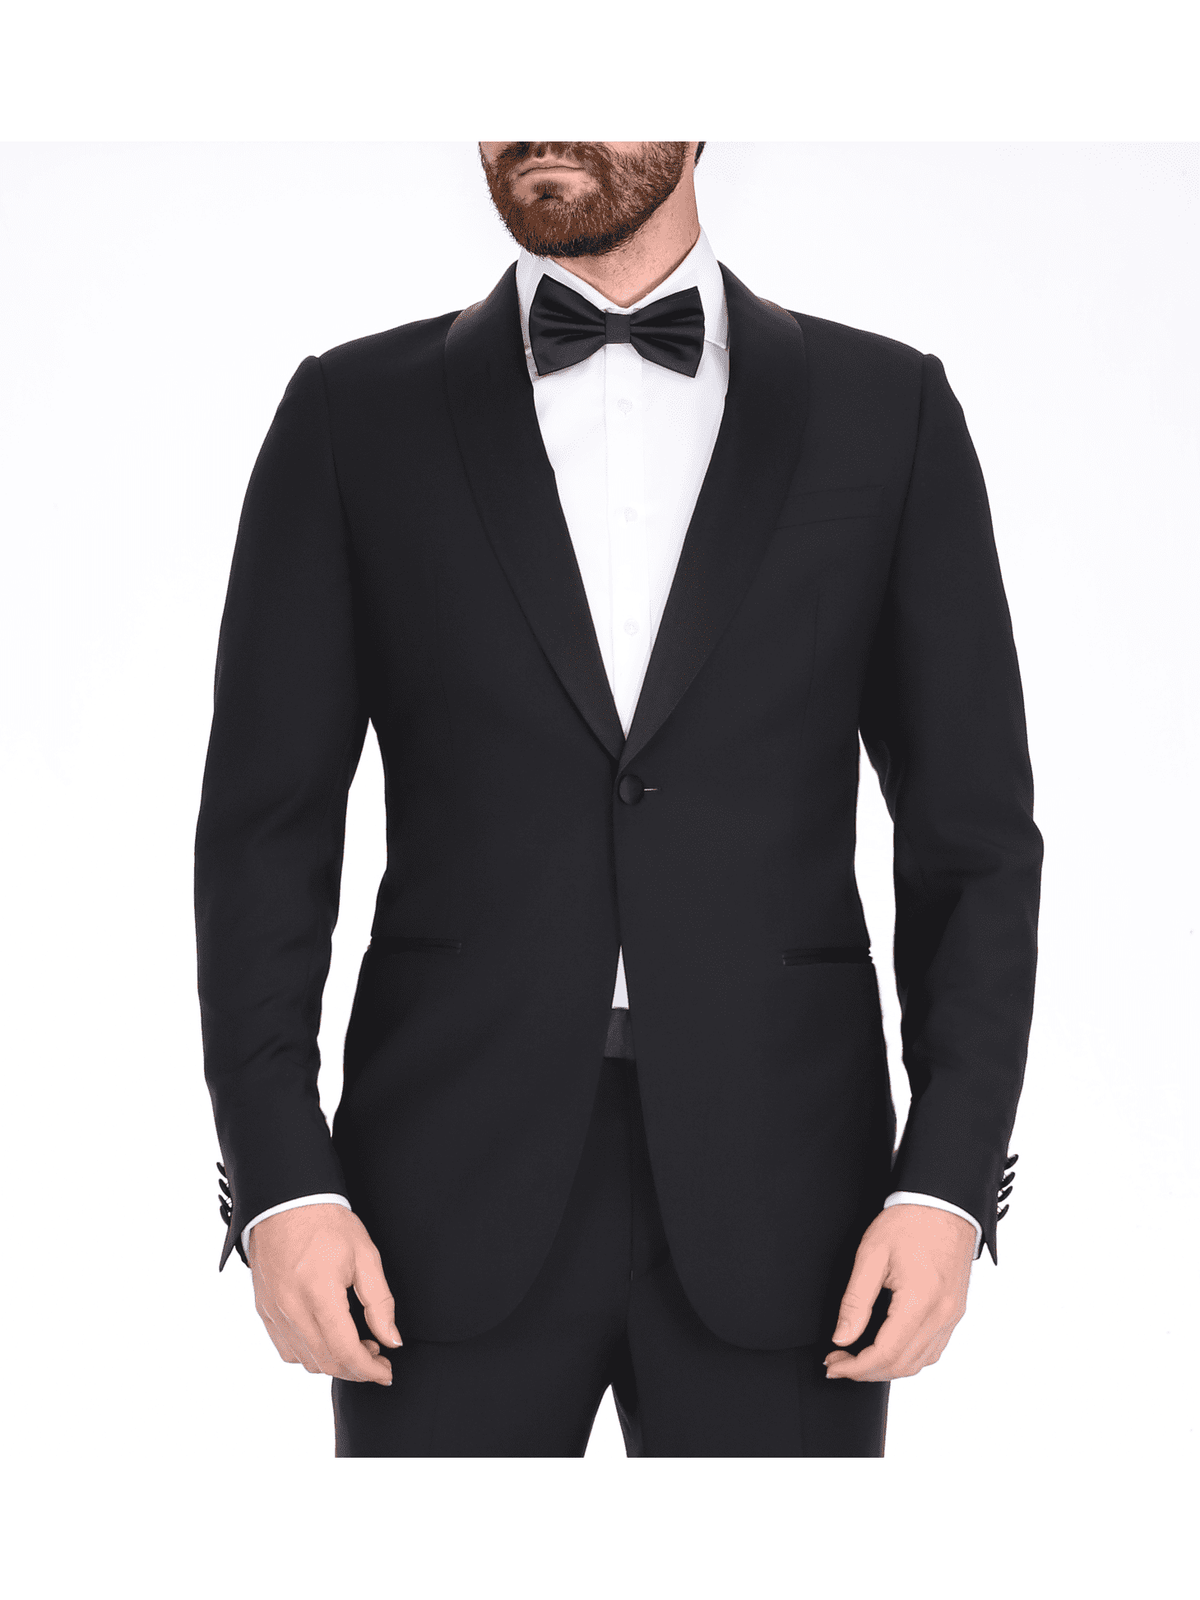 Blujacket TUXEDOS Blujacket Mens Solid Black 100% Wool Regular Fit Tuxedo Suit With Shawl Lapel